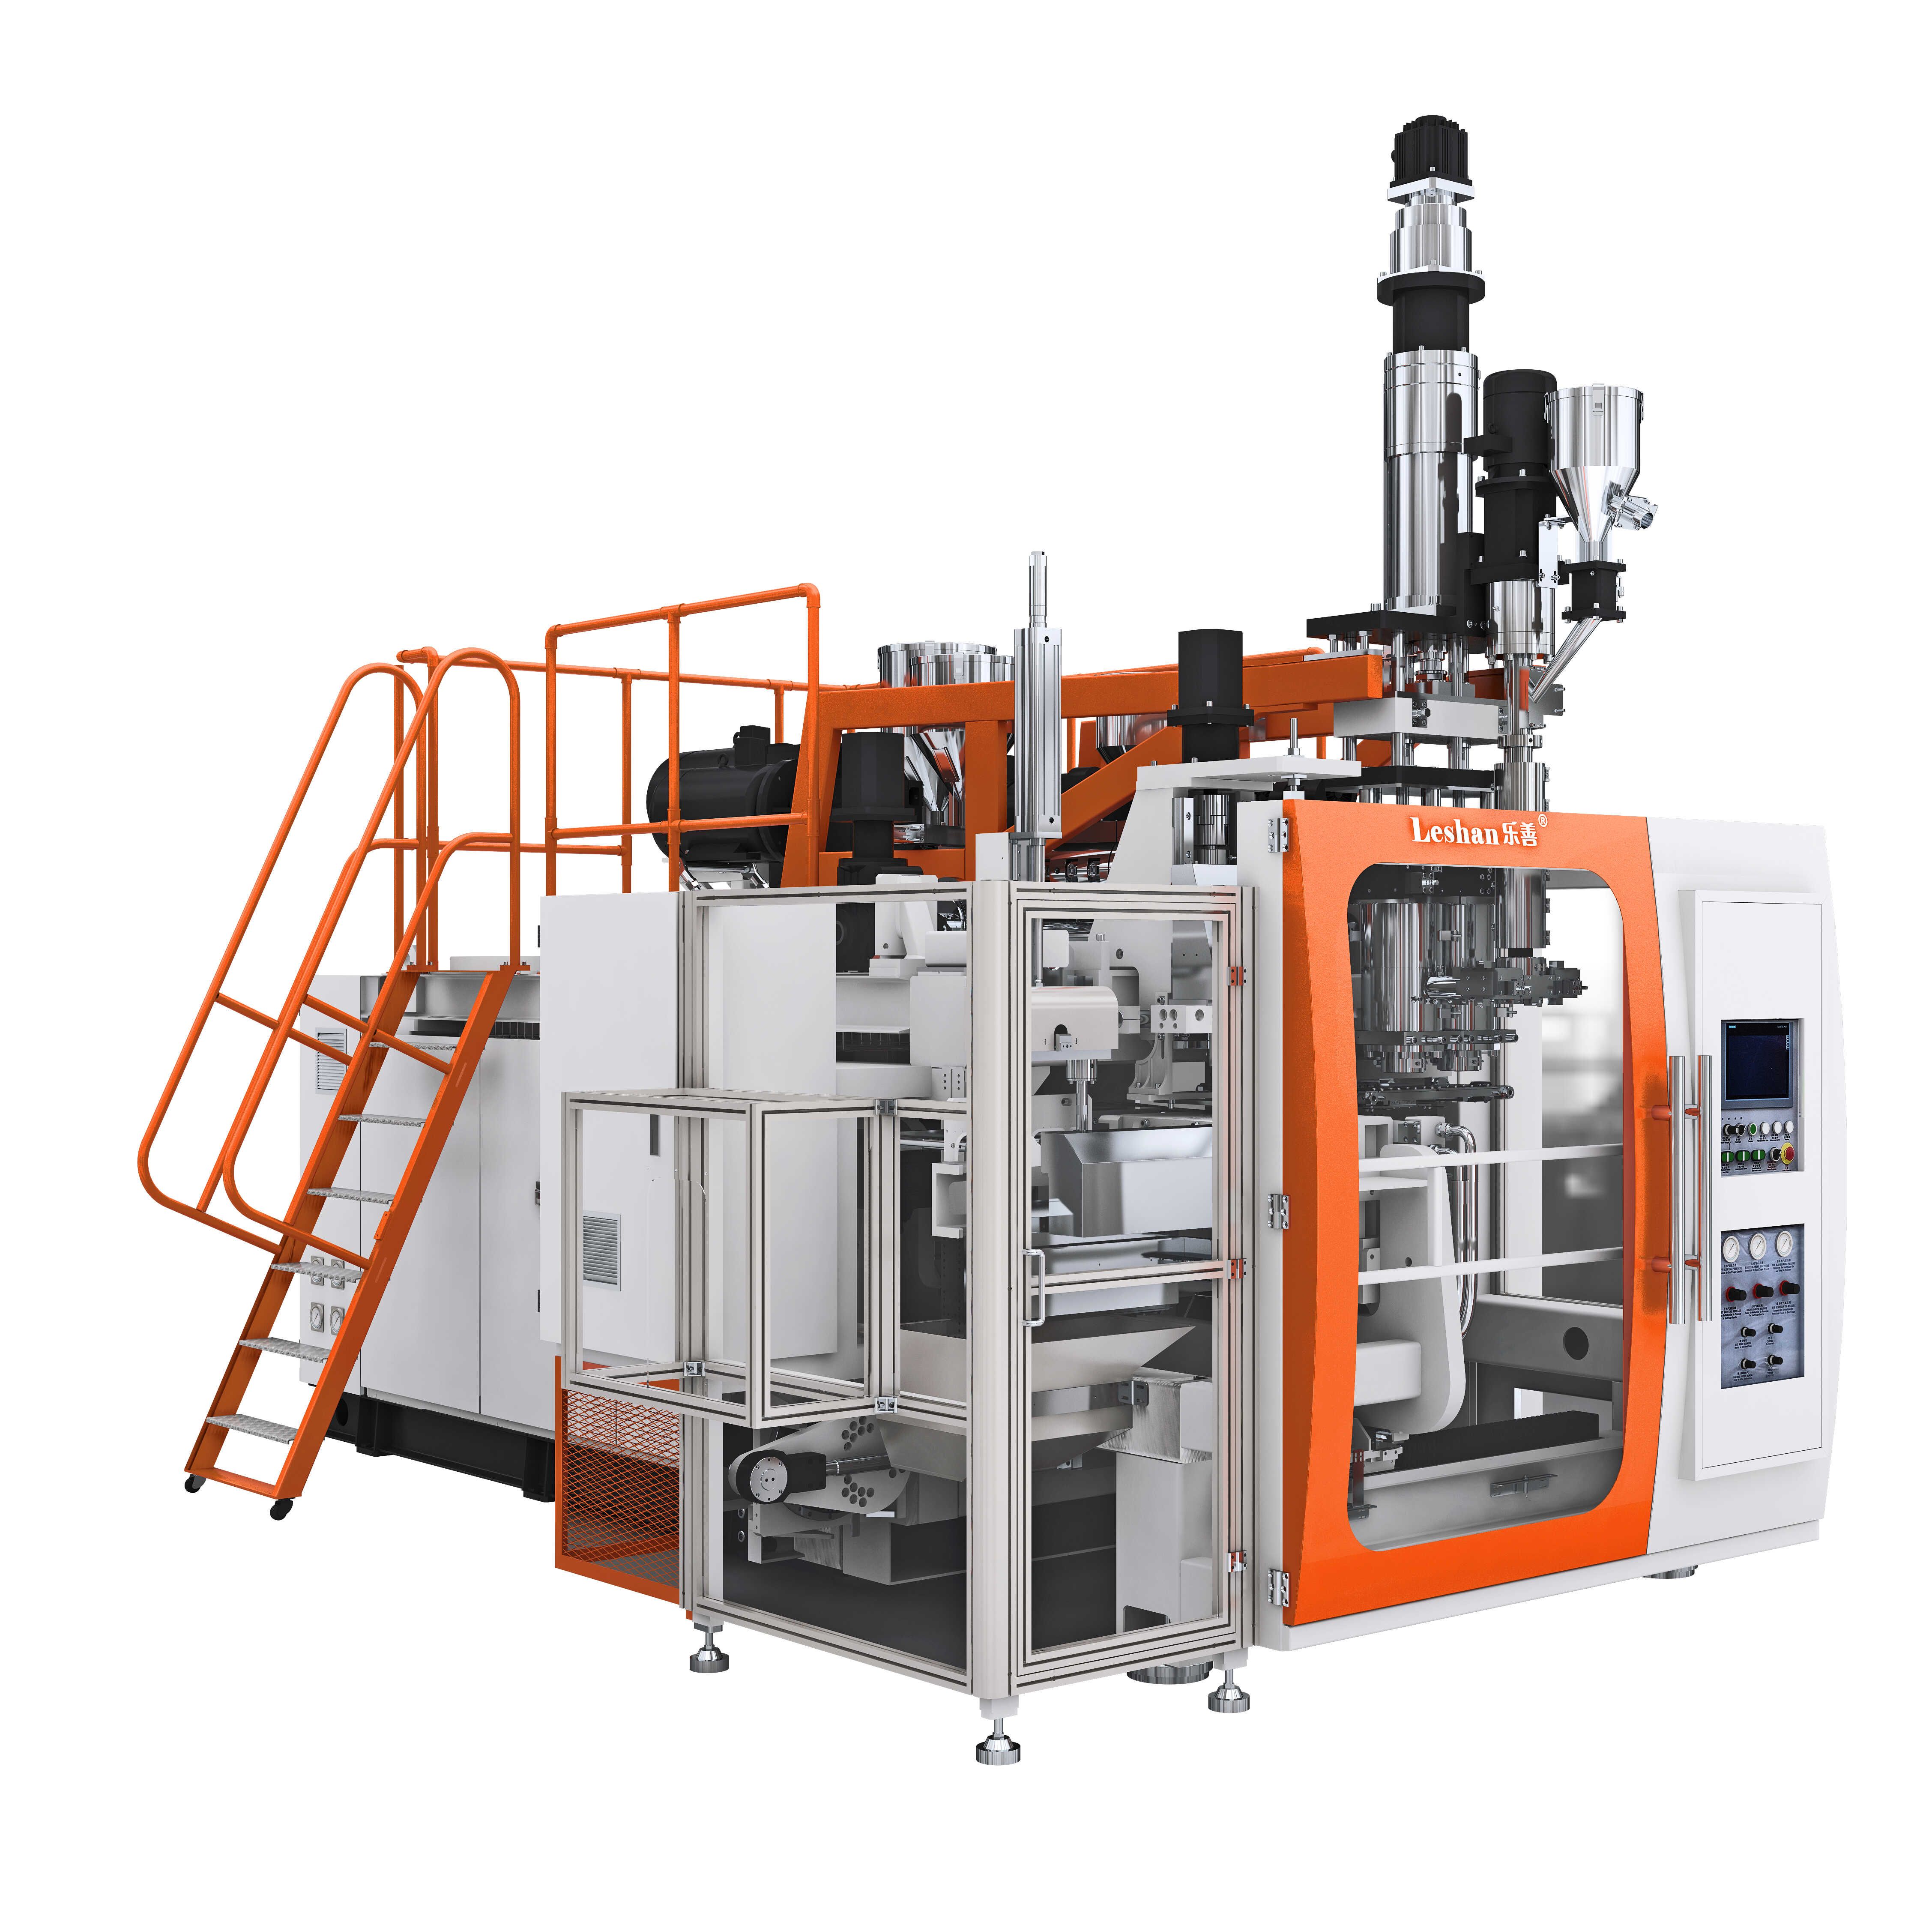 What are the common problems in the production process of abs blow molding machine?